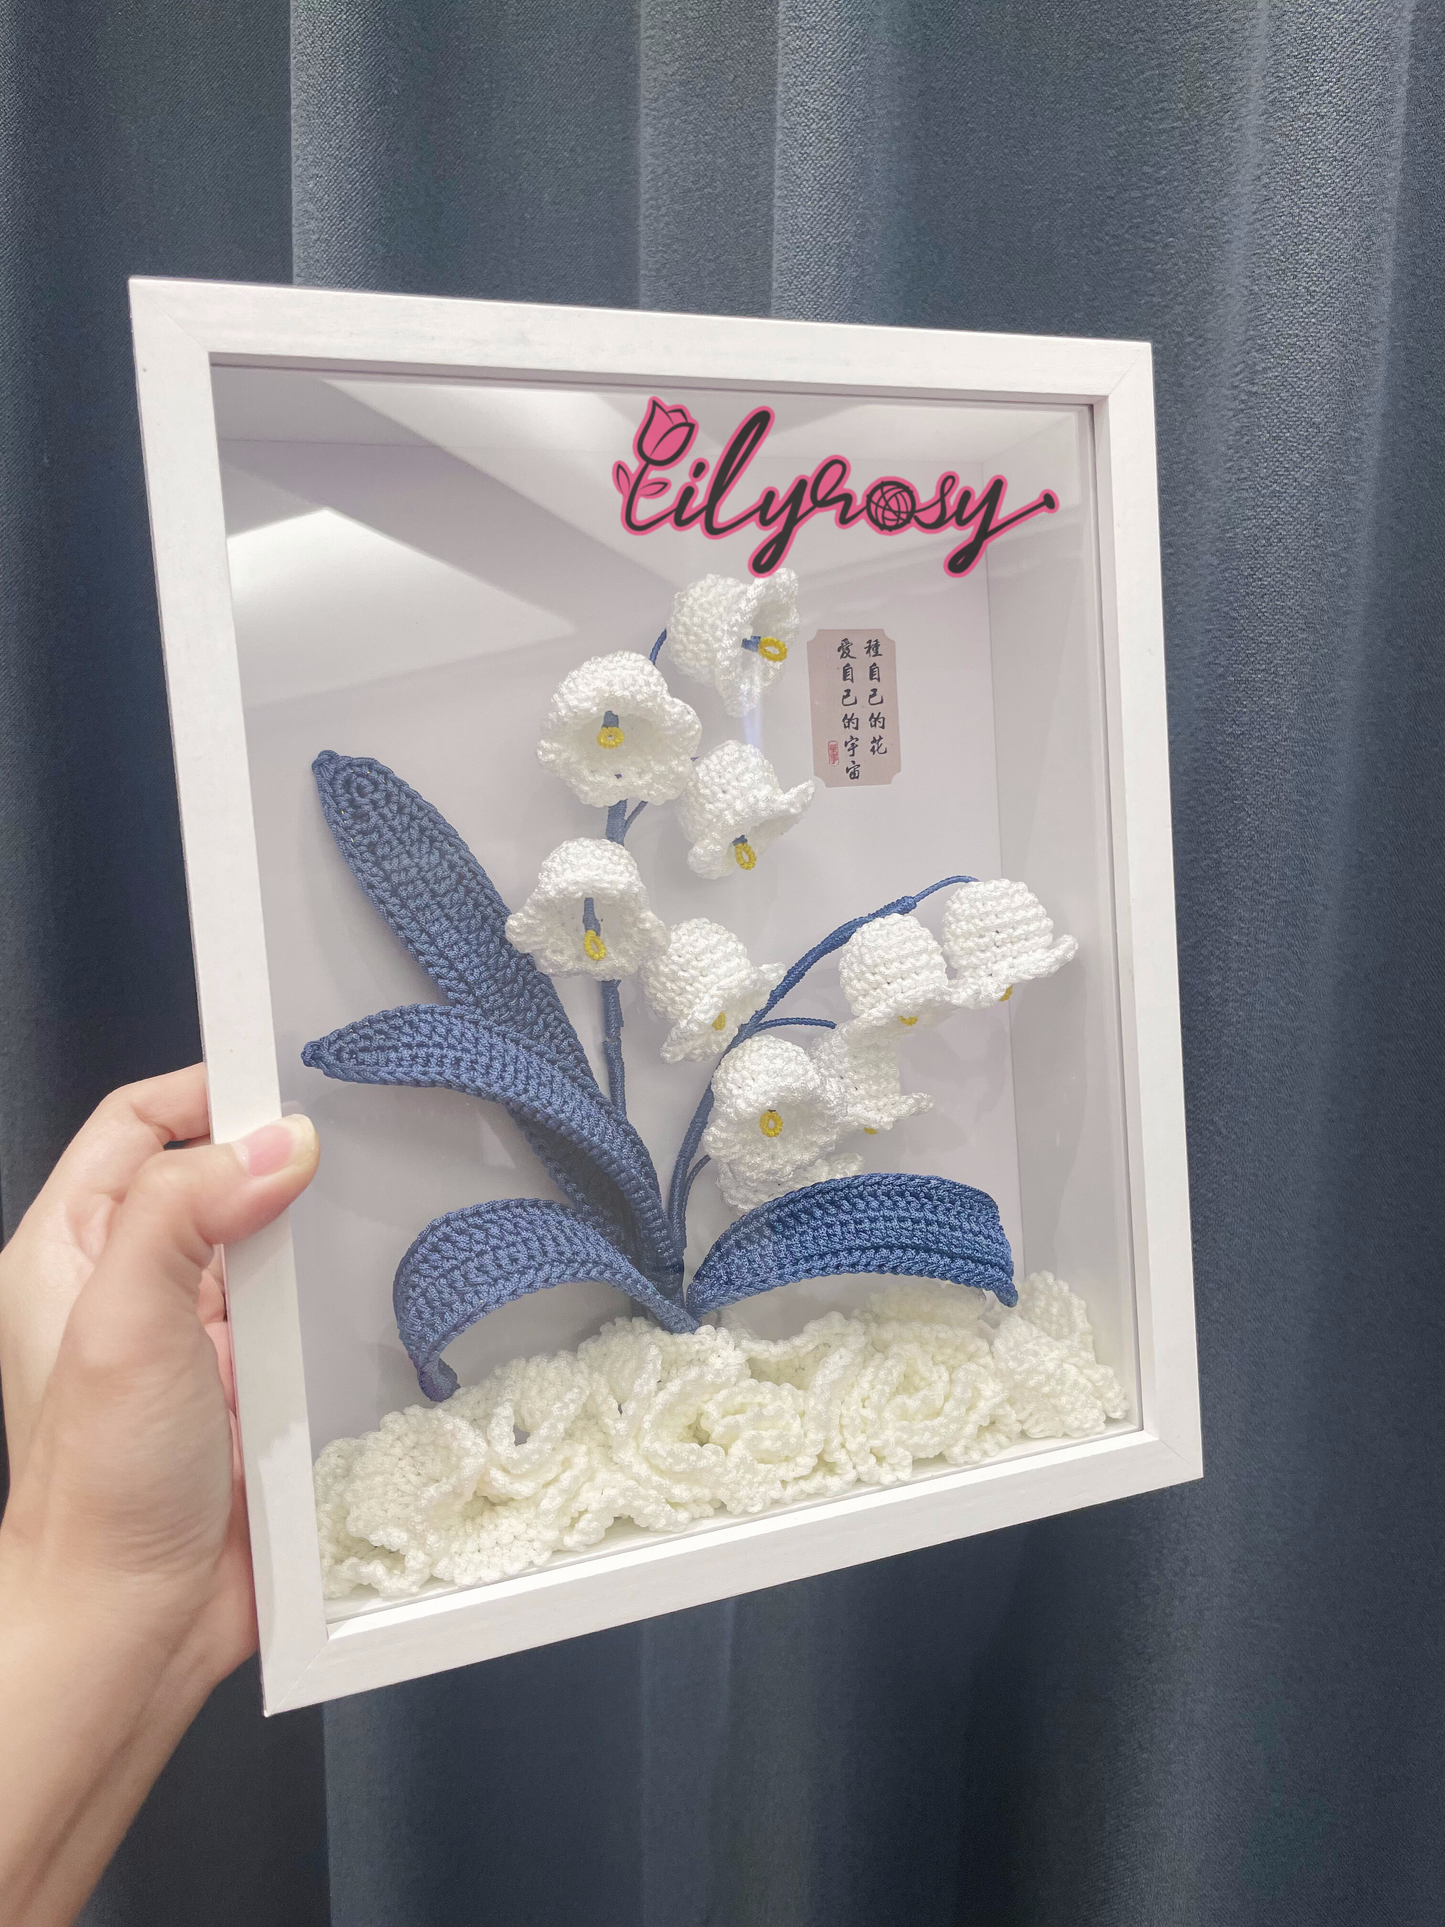 Handmade gifts|Crochet Lily of valley  photo frame ,table  Decor, Office decor,home decor